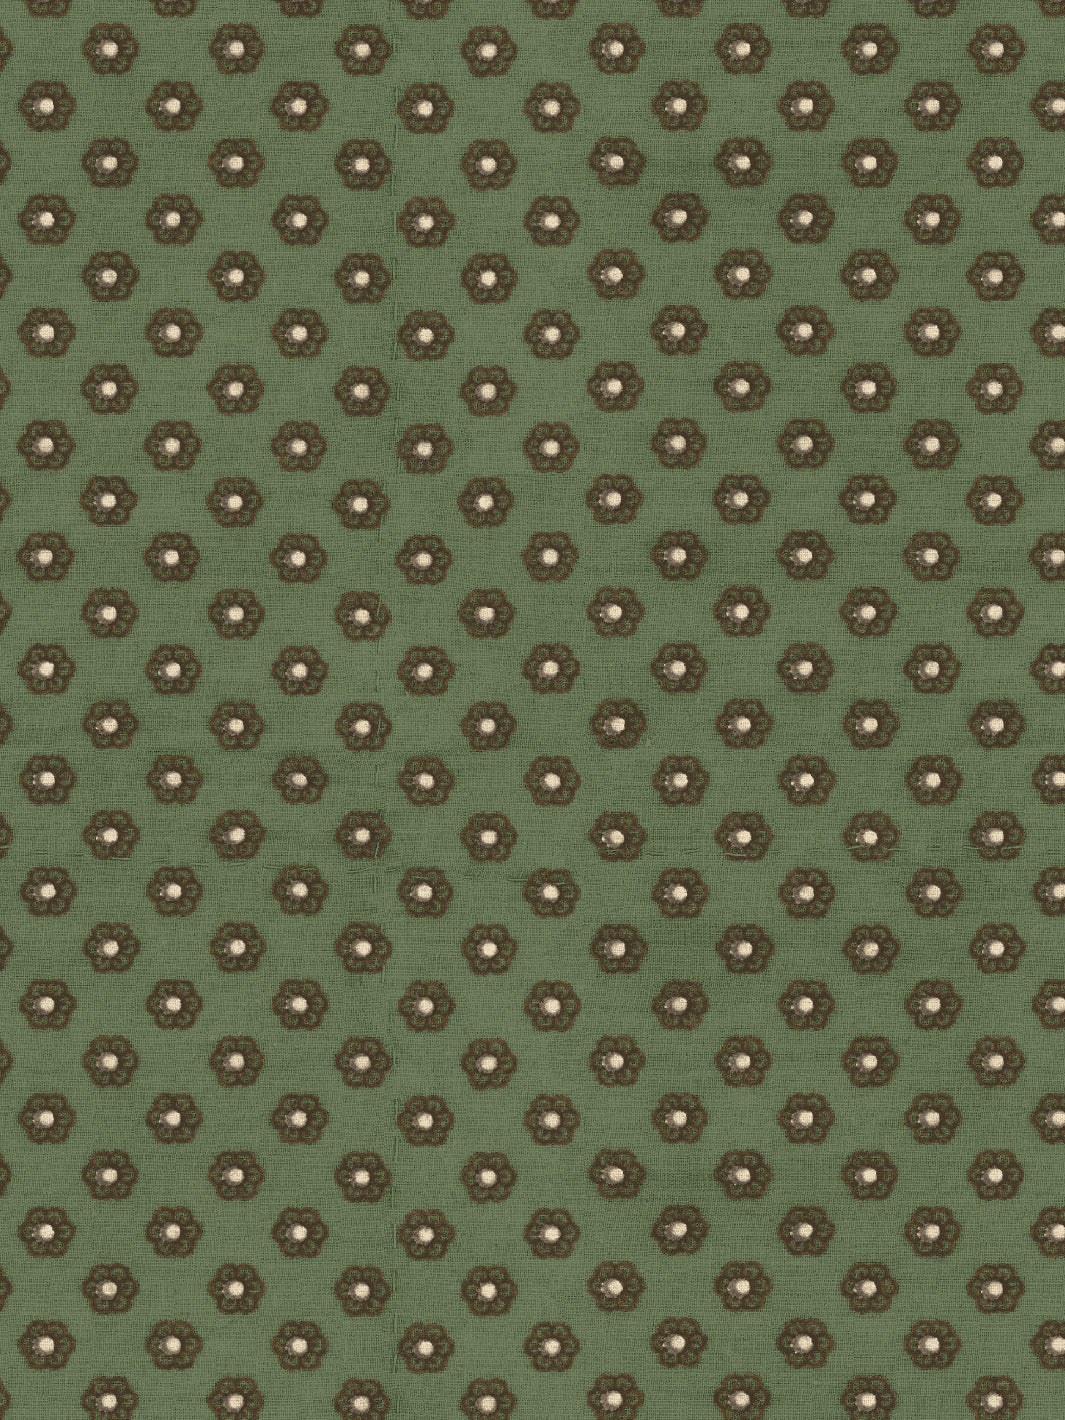 'Ditsy Flower' Wallpaper by Chris Benz - Olive